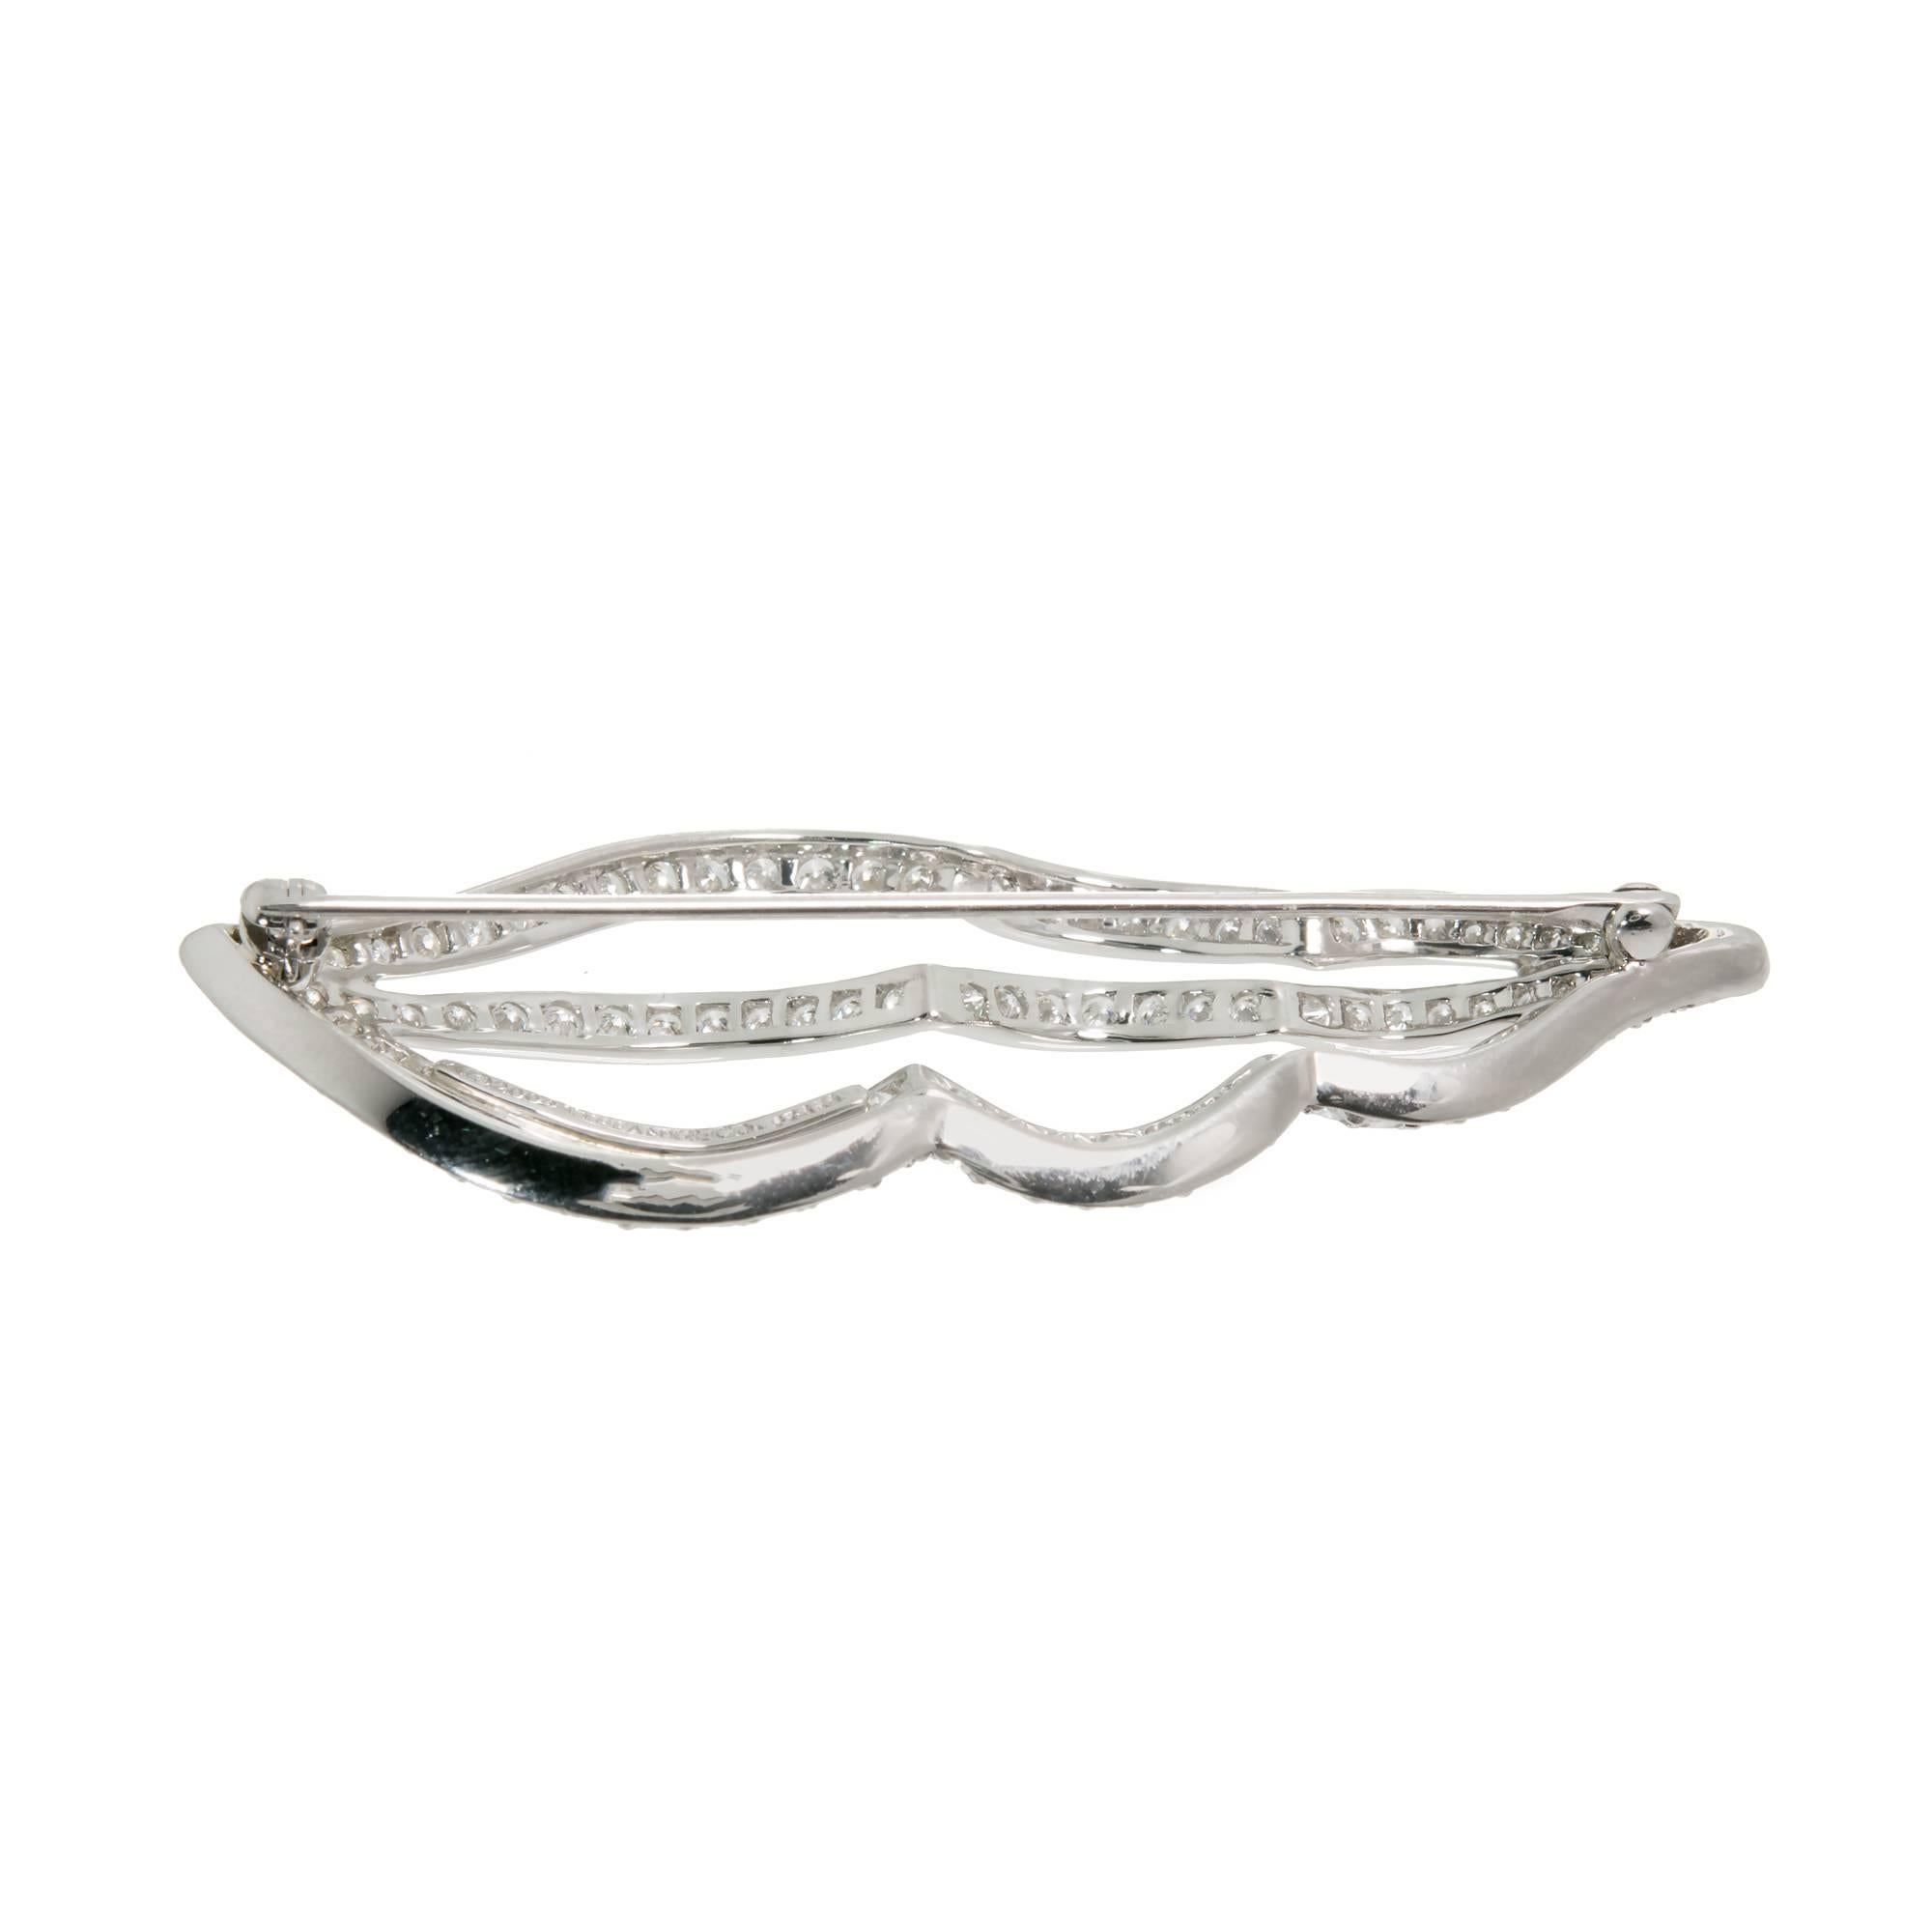 Tiffany & Co Platinum Diamond Shell Brooch. 119 round diamonds set in Platinum. 

119 round diamonds full cut F VS Approx. total weight 2.00 cts
Platinum
Tested: Platinum
Stamped: Pt 950
Hallmark: c 2004 Tiffany & Co
Top to Bottom: 56.88mm or 2.24